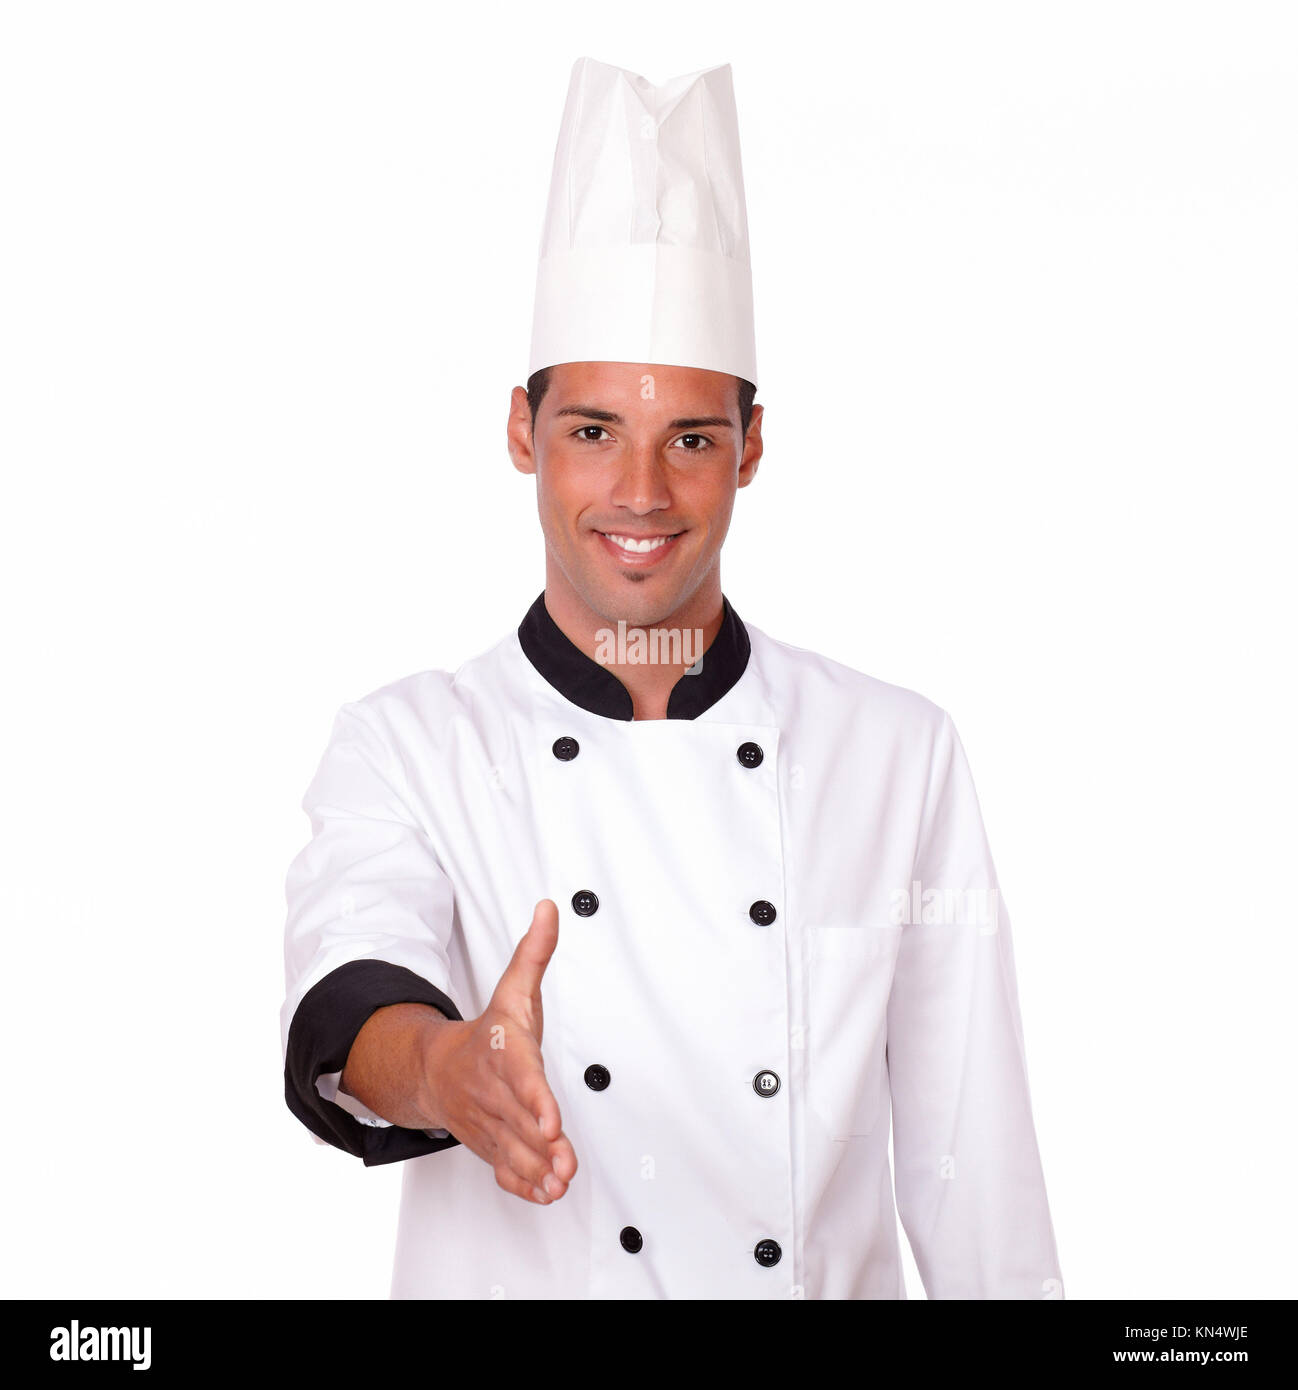 Portrait of handsome 20-24 years male chef on white uniform with greeting gesture smiling at you on isolated background. Stock Photo